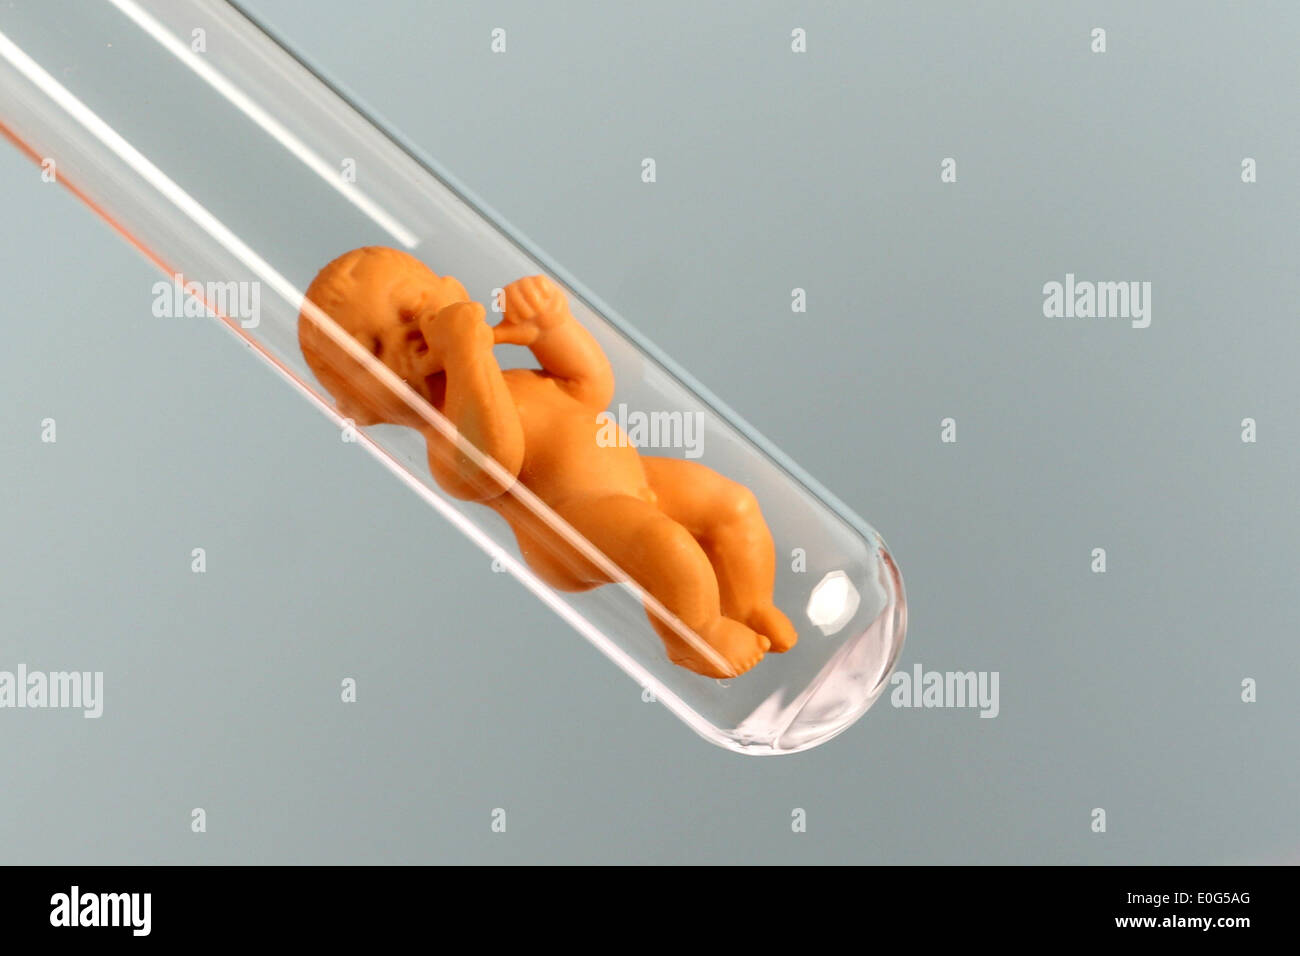 Test-tube baby, effigy, alike, resemblance, alike, resemblance, appearance, concepts, biologically, biological, to biological, m Stock Photo